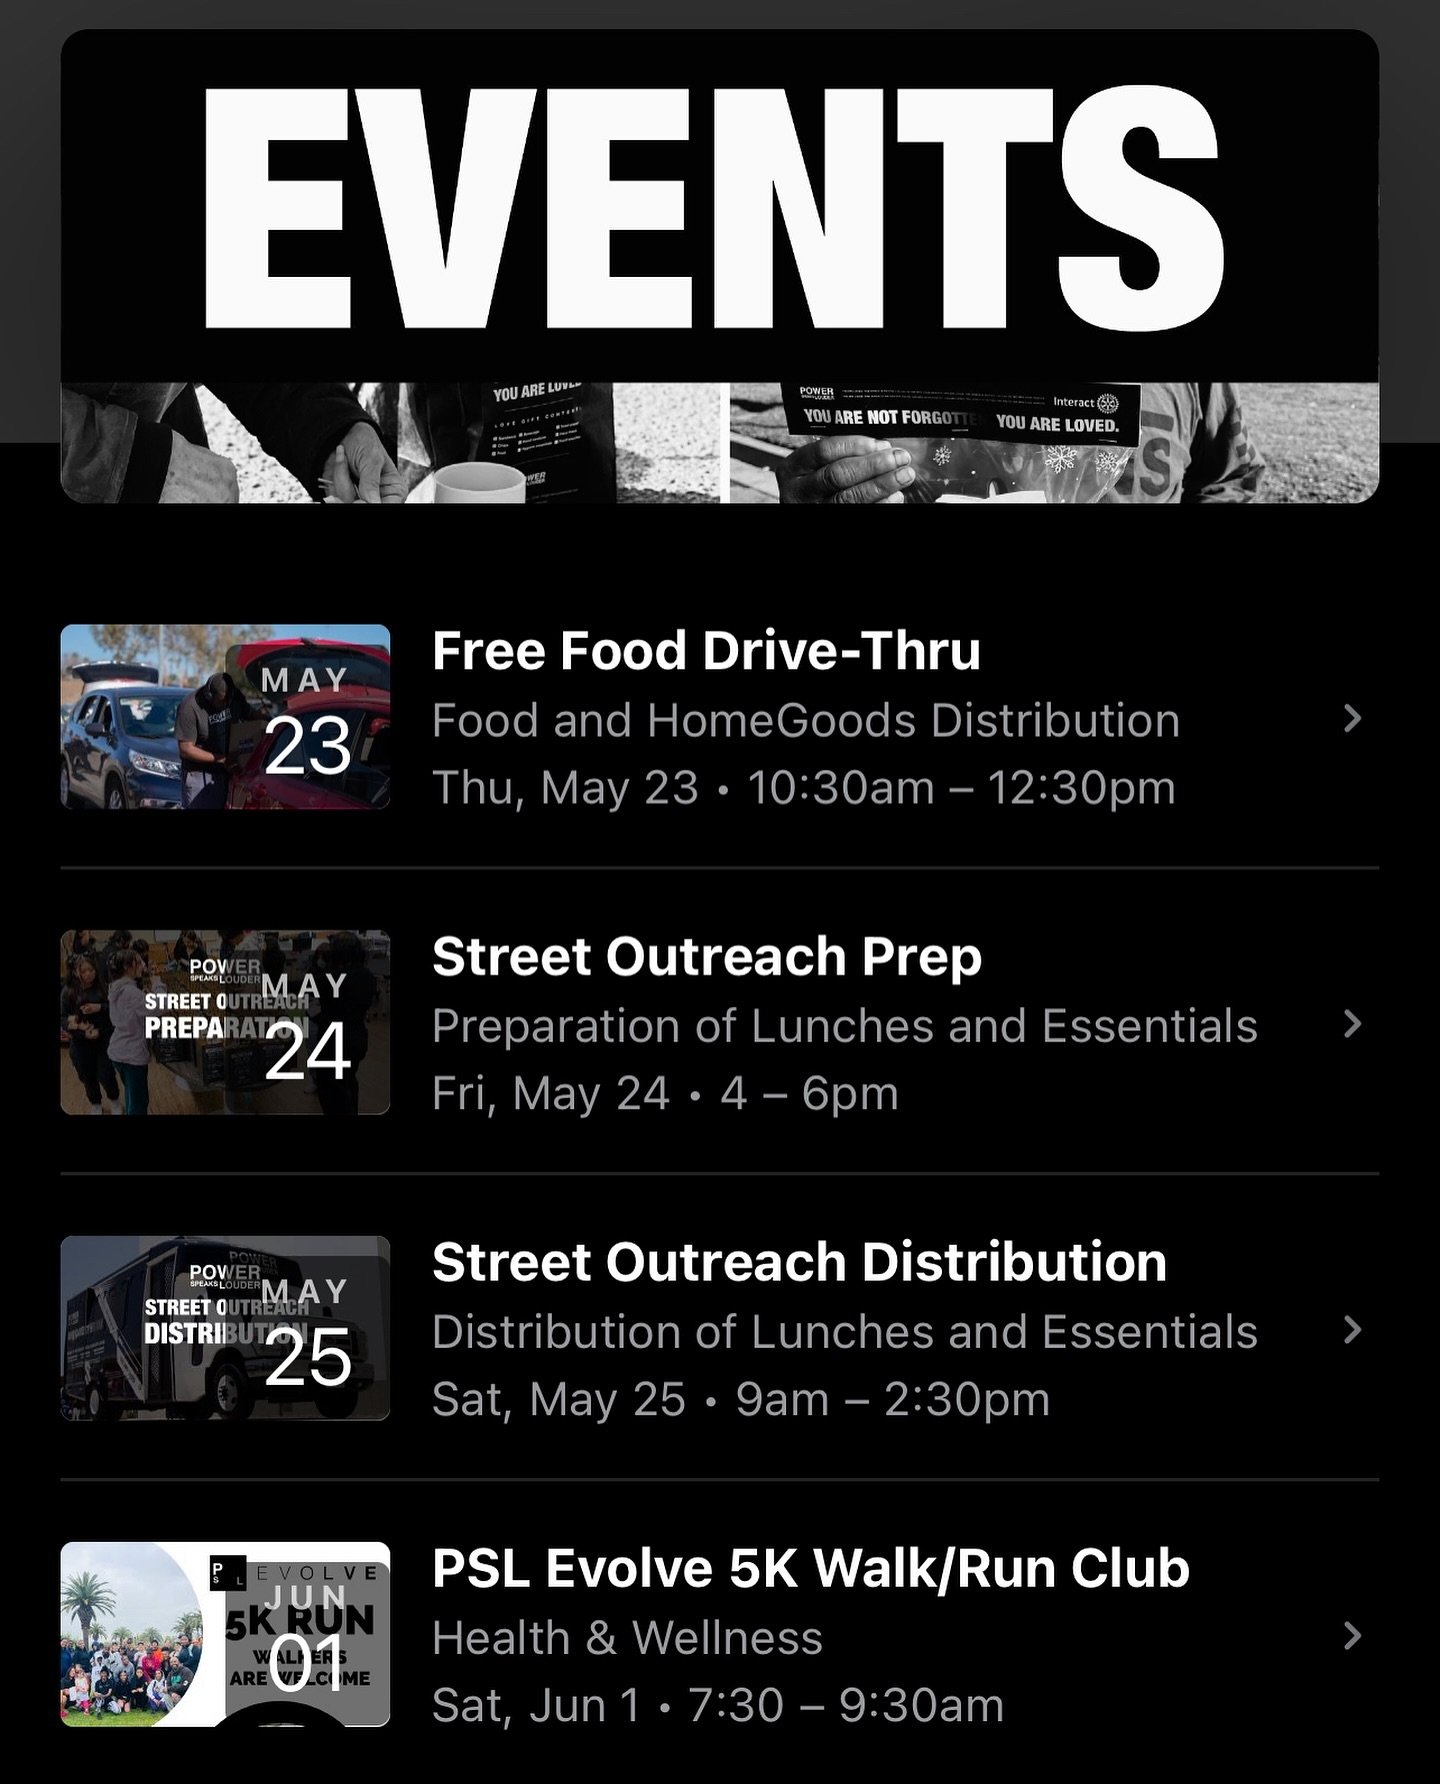 🚨SWIPE for Upcoming PSL Events! 🚨 Stay up to date with our on-going outreaches and @pslevolve Walk/Run Club on our app! Tomorrow we are back with the PSL Free Food Drive-Thru on THURSDAY, May 23rd at 10:30am located at the @movalmall parking lot en